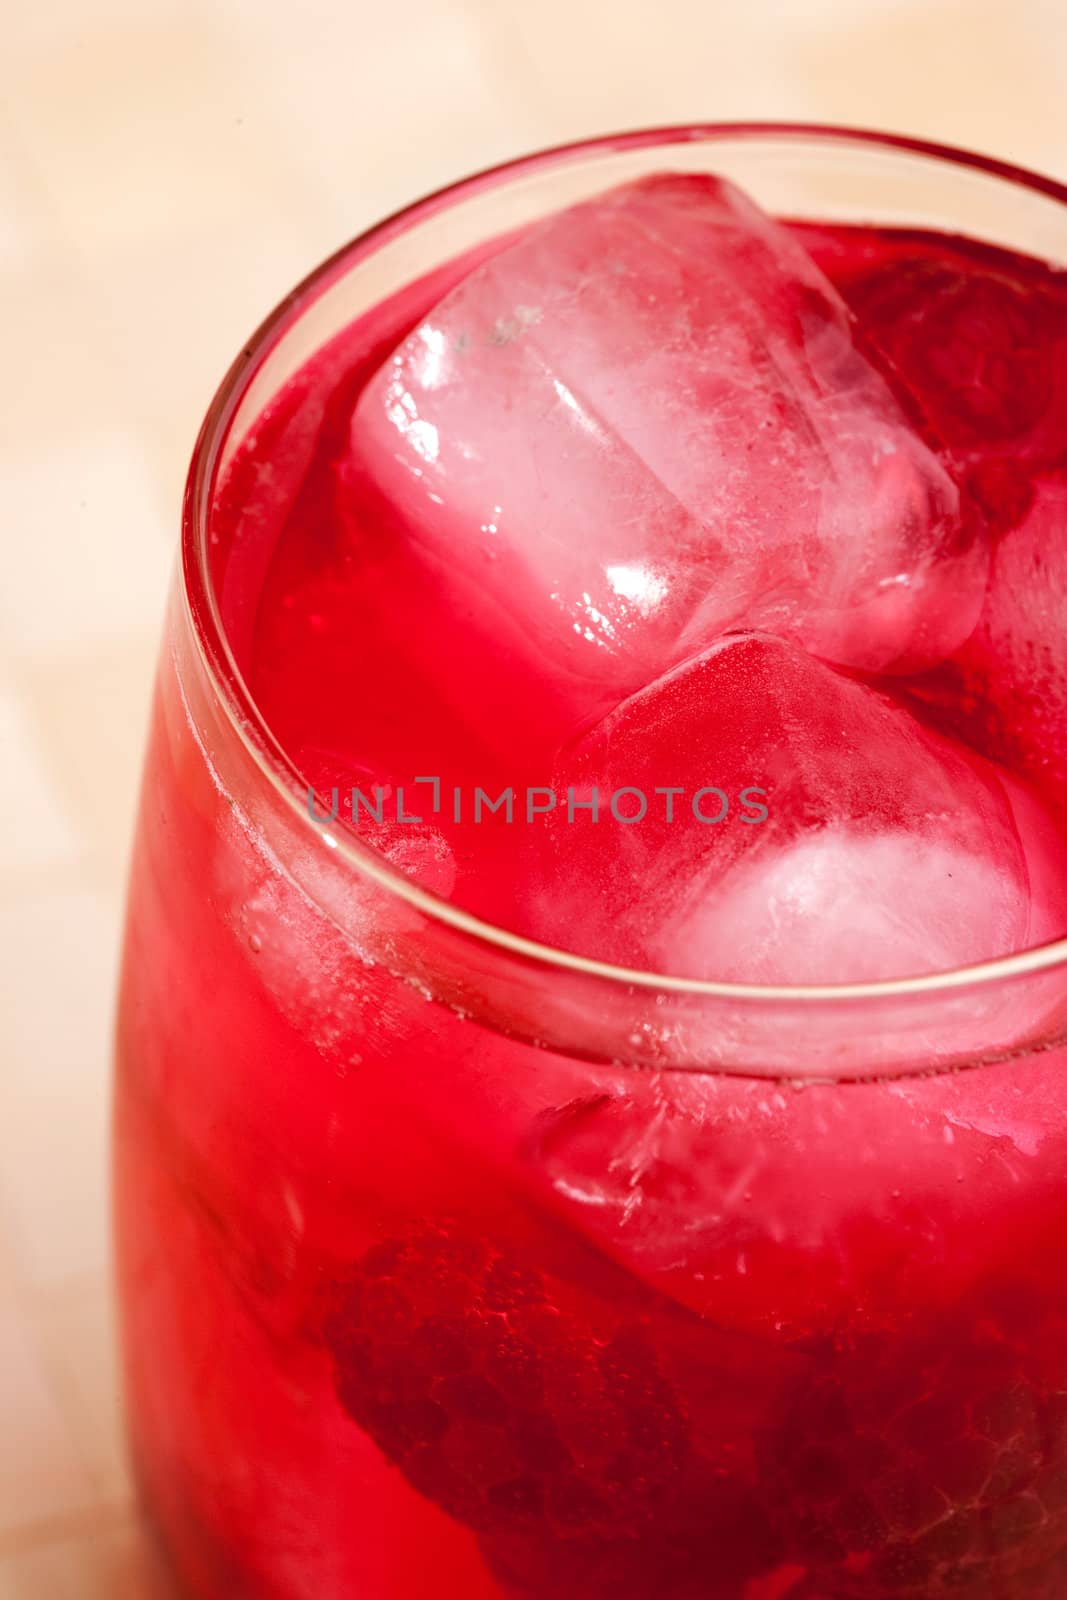 A glass of sparkling raspberry punch outdoors in a natural setting